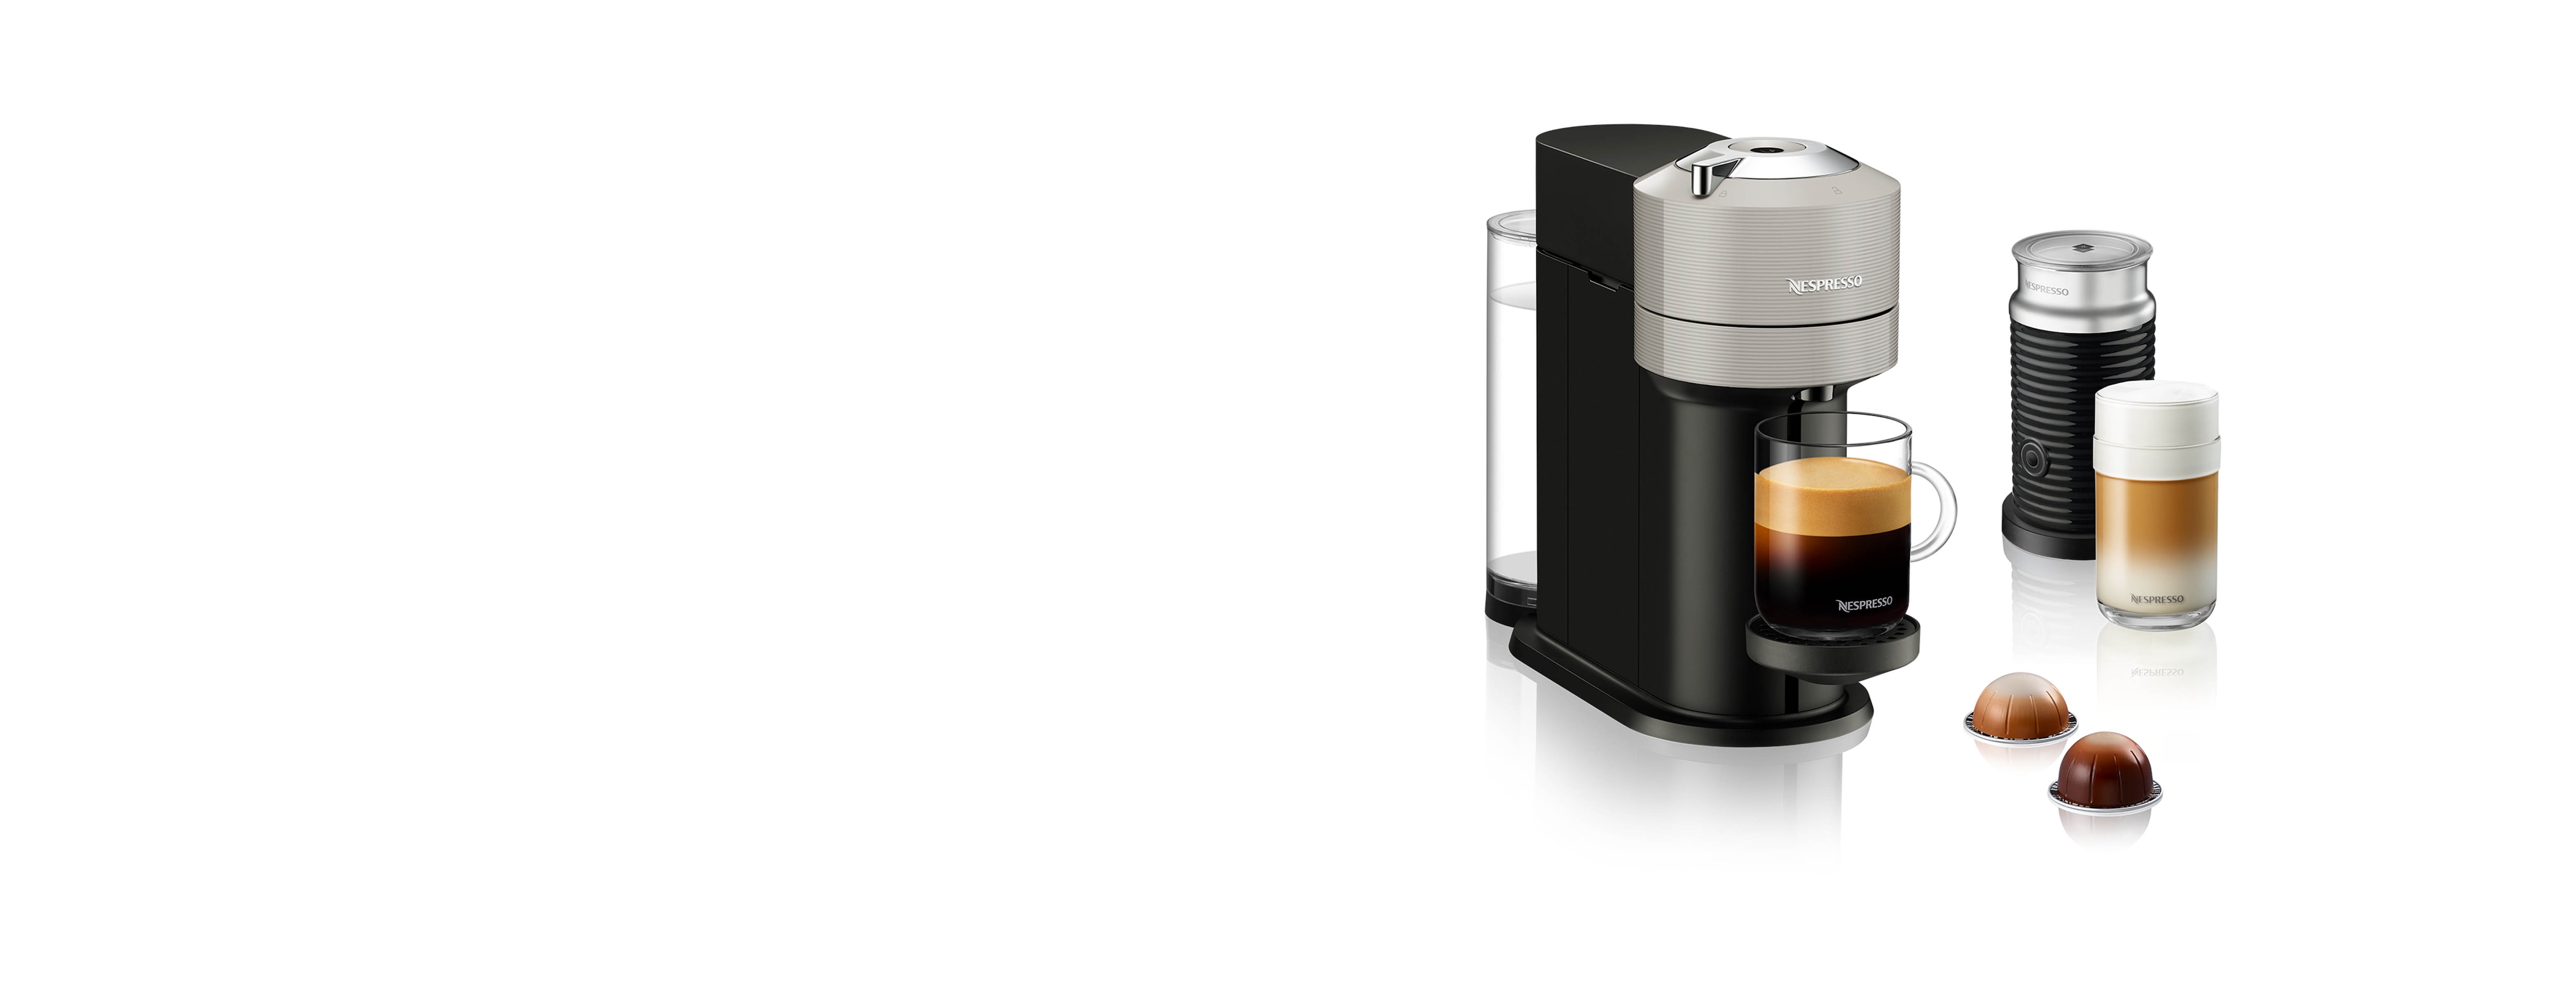 Nespresso Vertuo Next Review: For Supersize Coffee